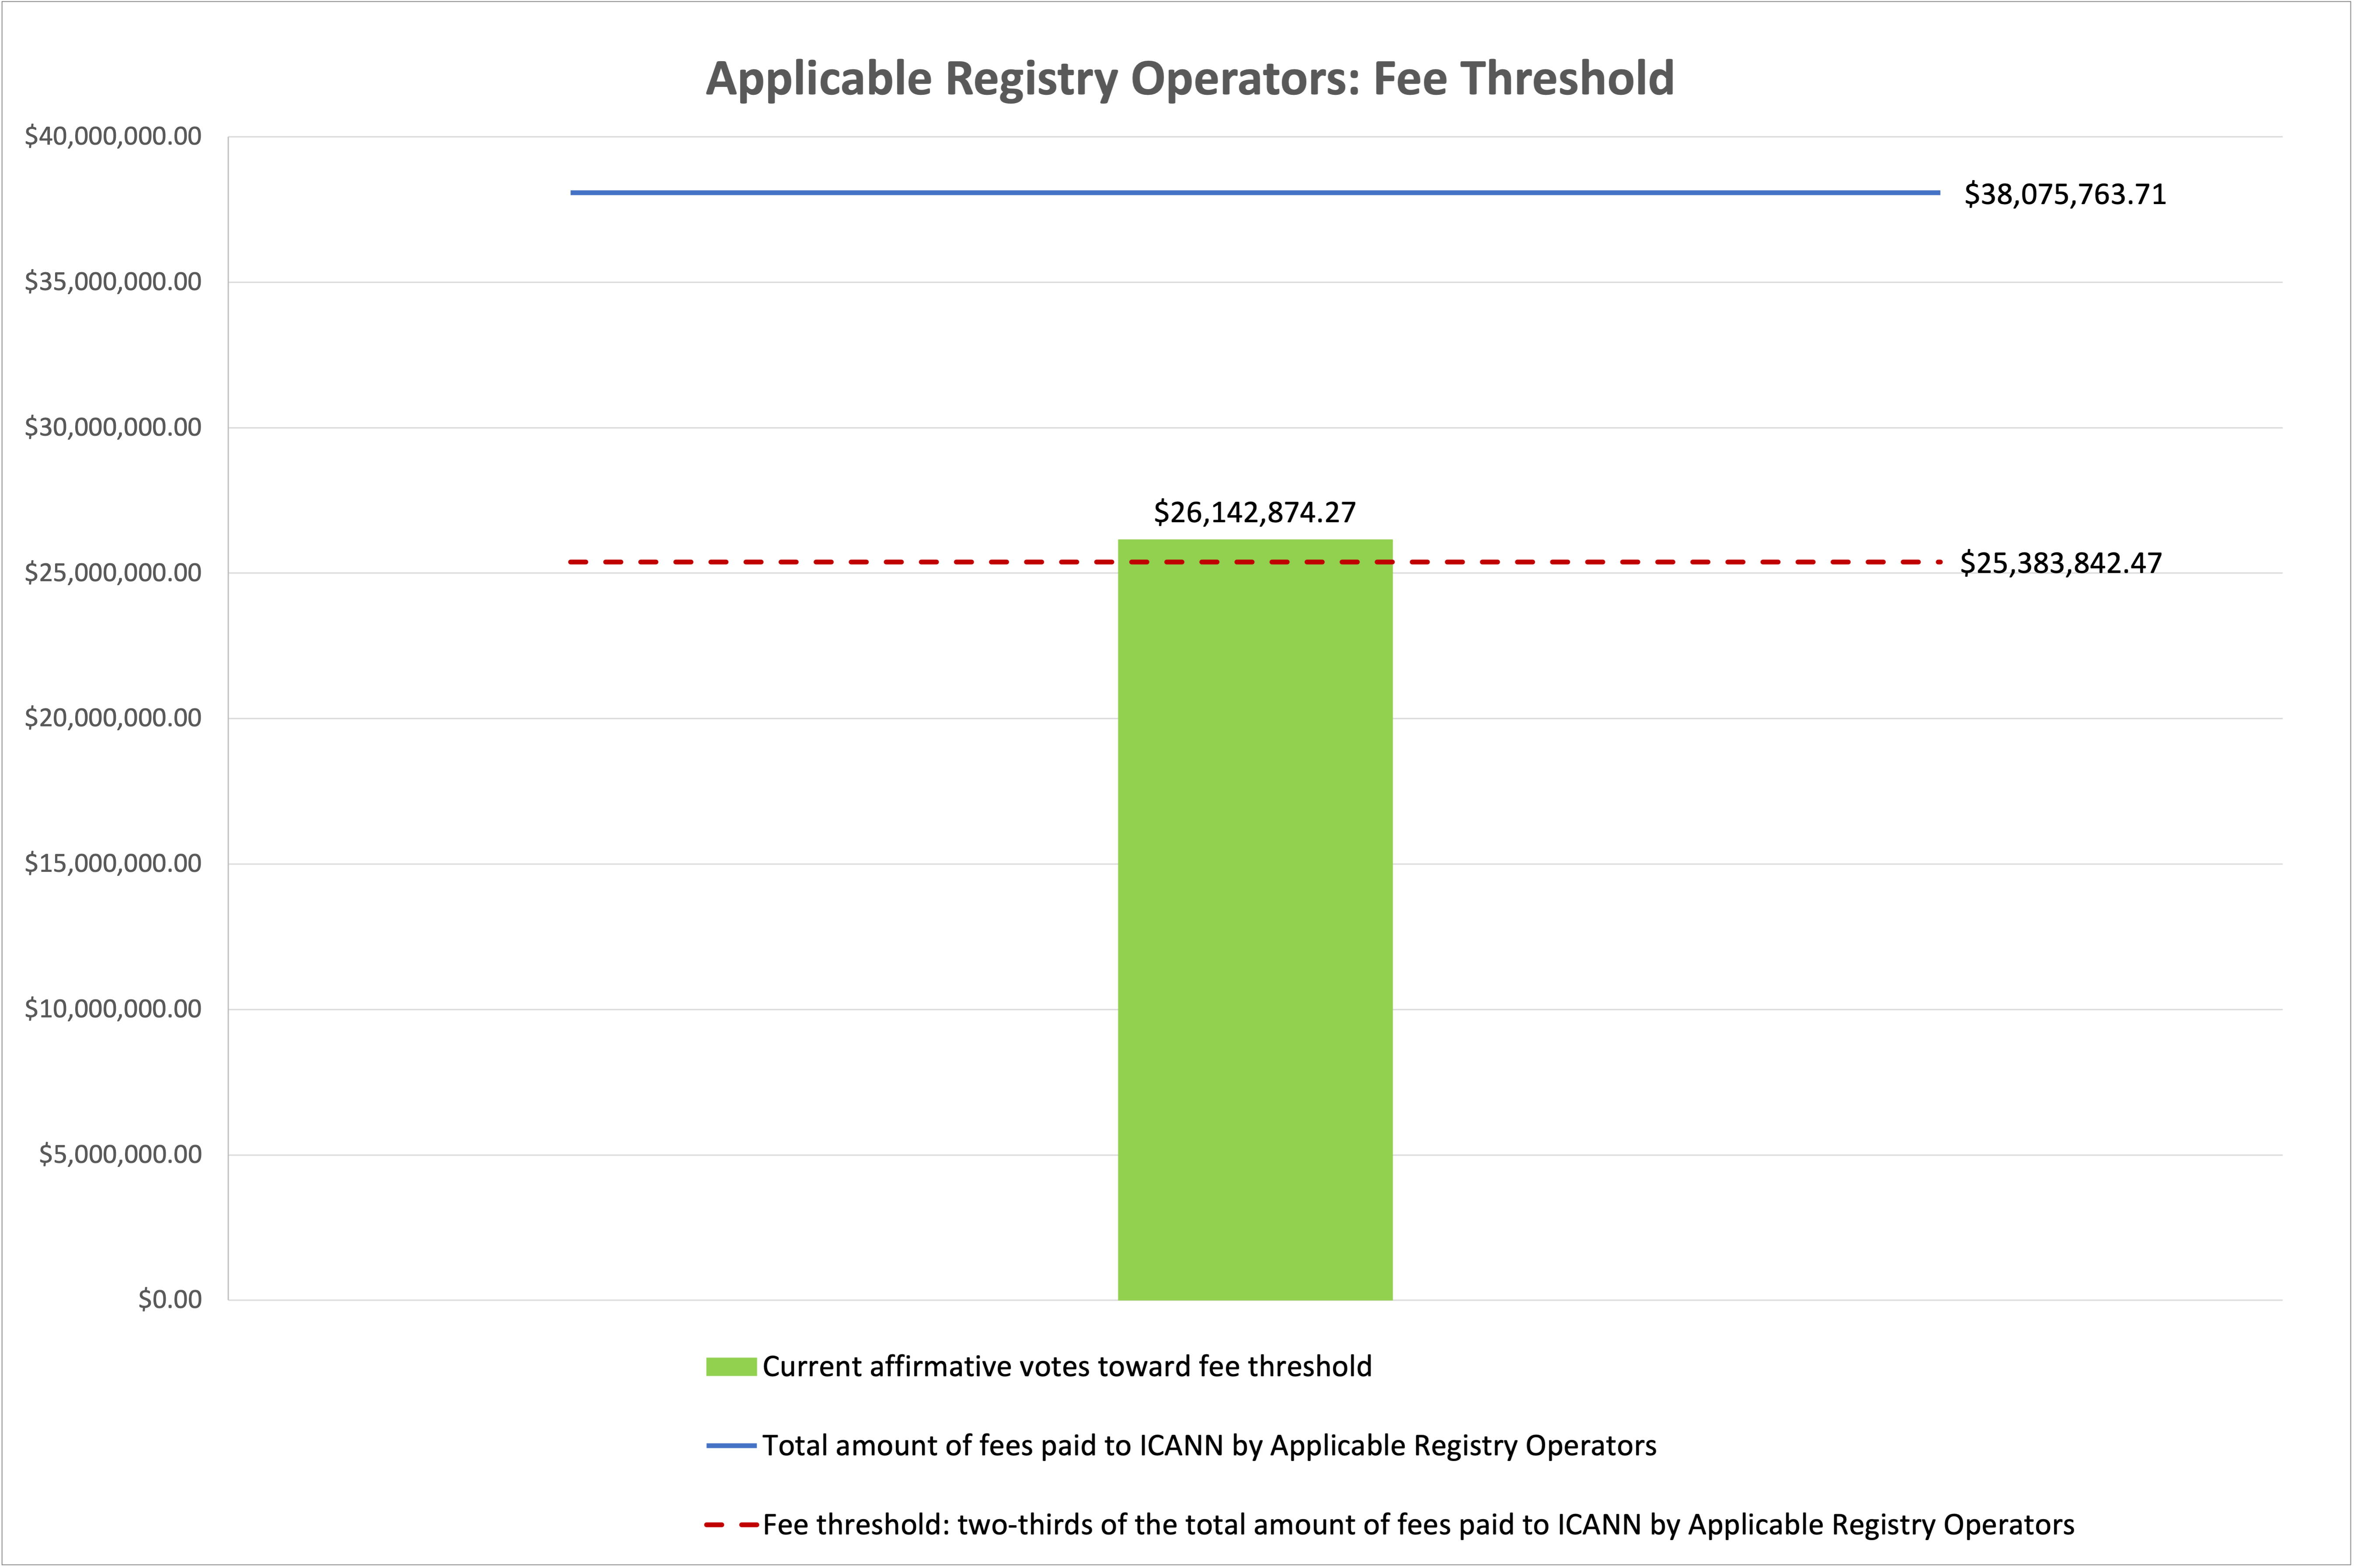 Bar chart of the progress of the vote towards meeting the fee threshold for Applicable Registry Operators. Fee approval threshold of $25,383,842.47 with current affirmative votes toward the fee threshold at $26,142,874.27